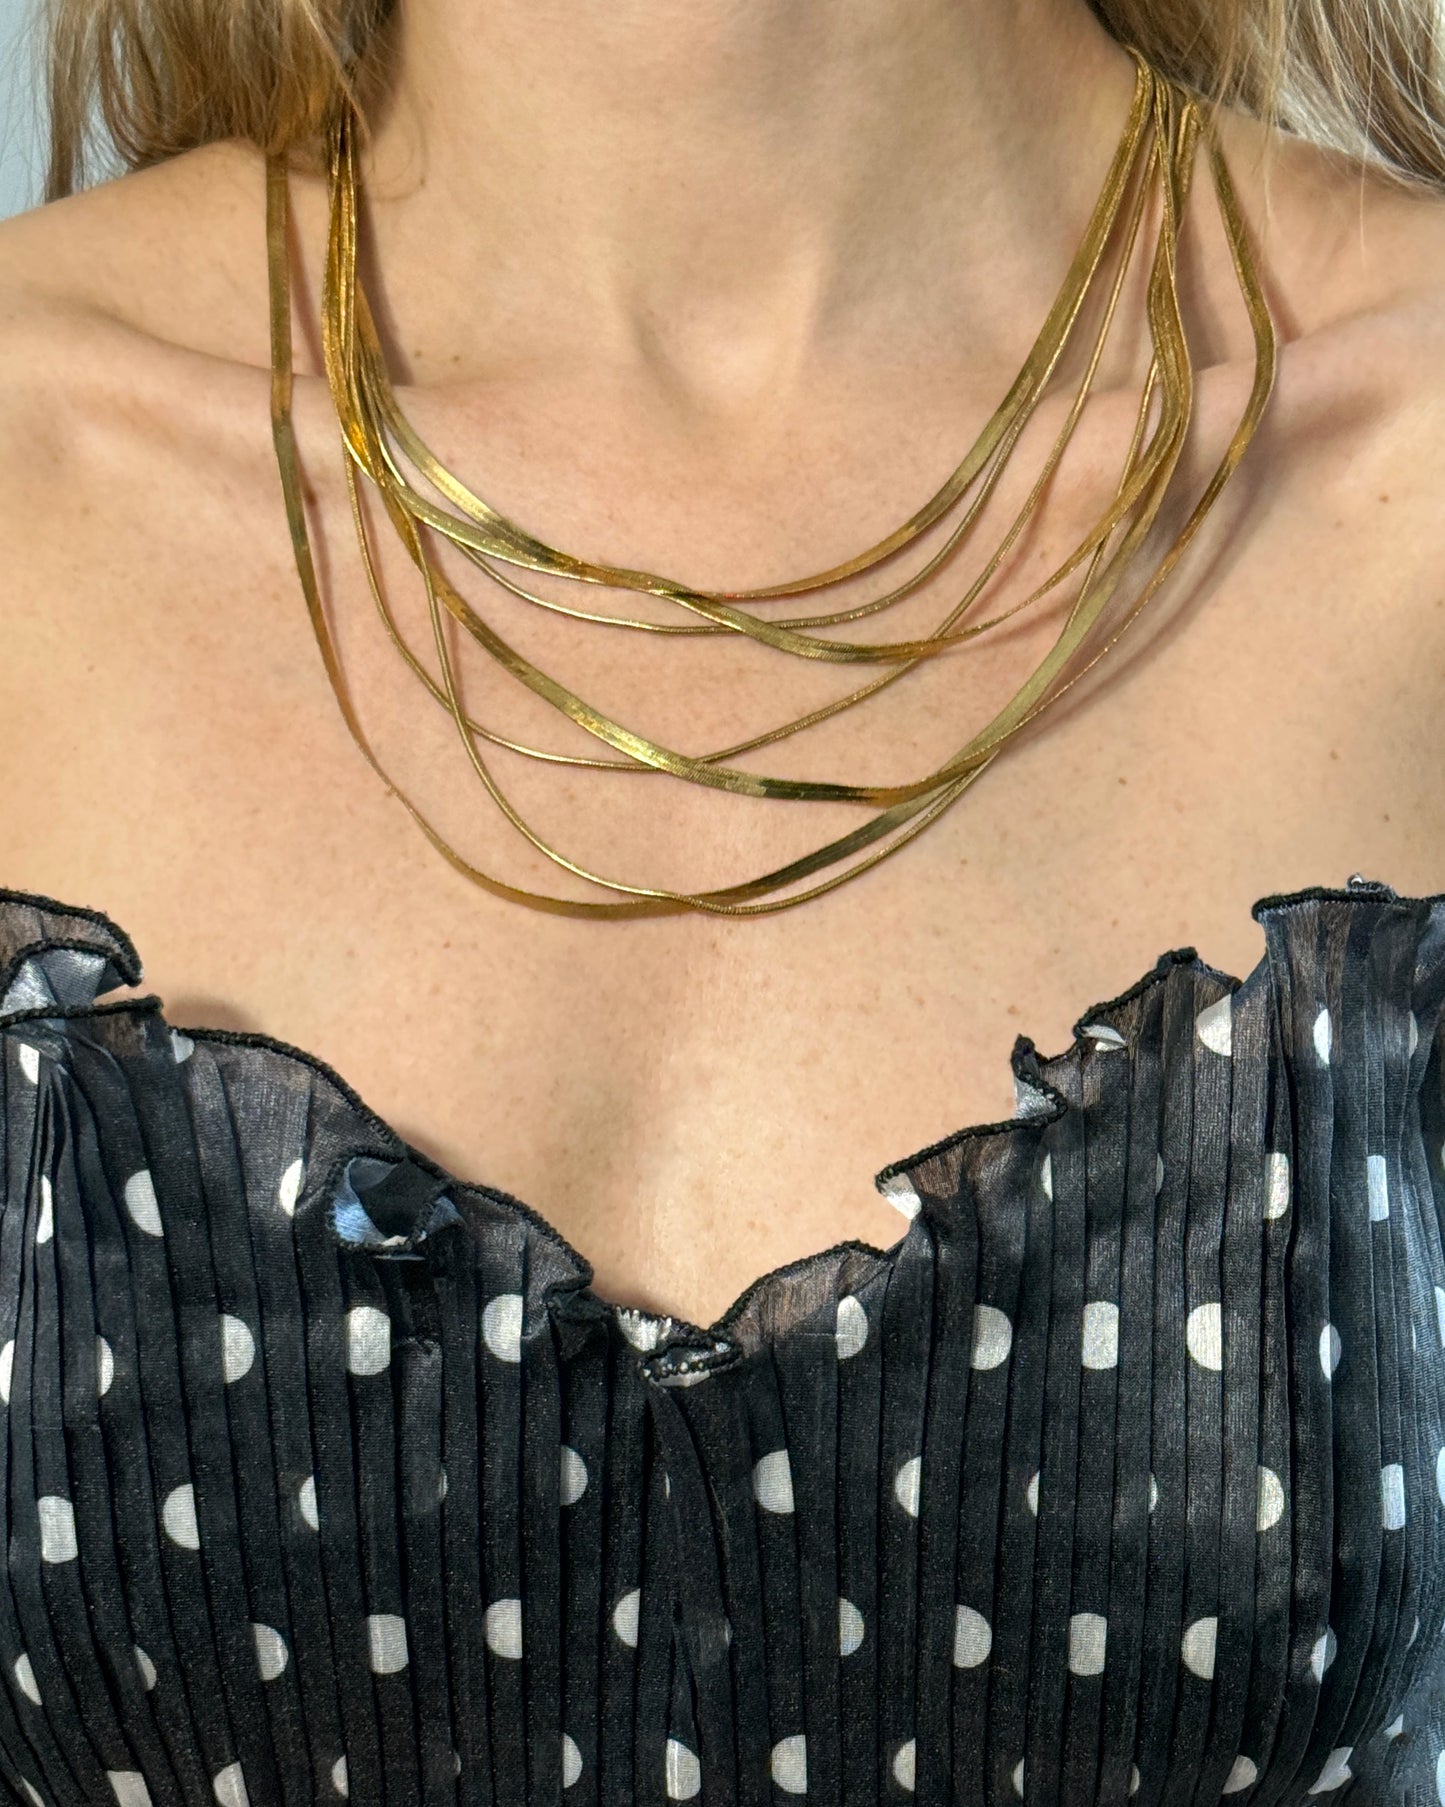 VINTAGE 1970s MULTI-STRAND GOLD OMEGA CHAIN NECKLACE